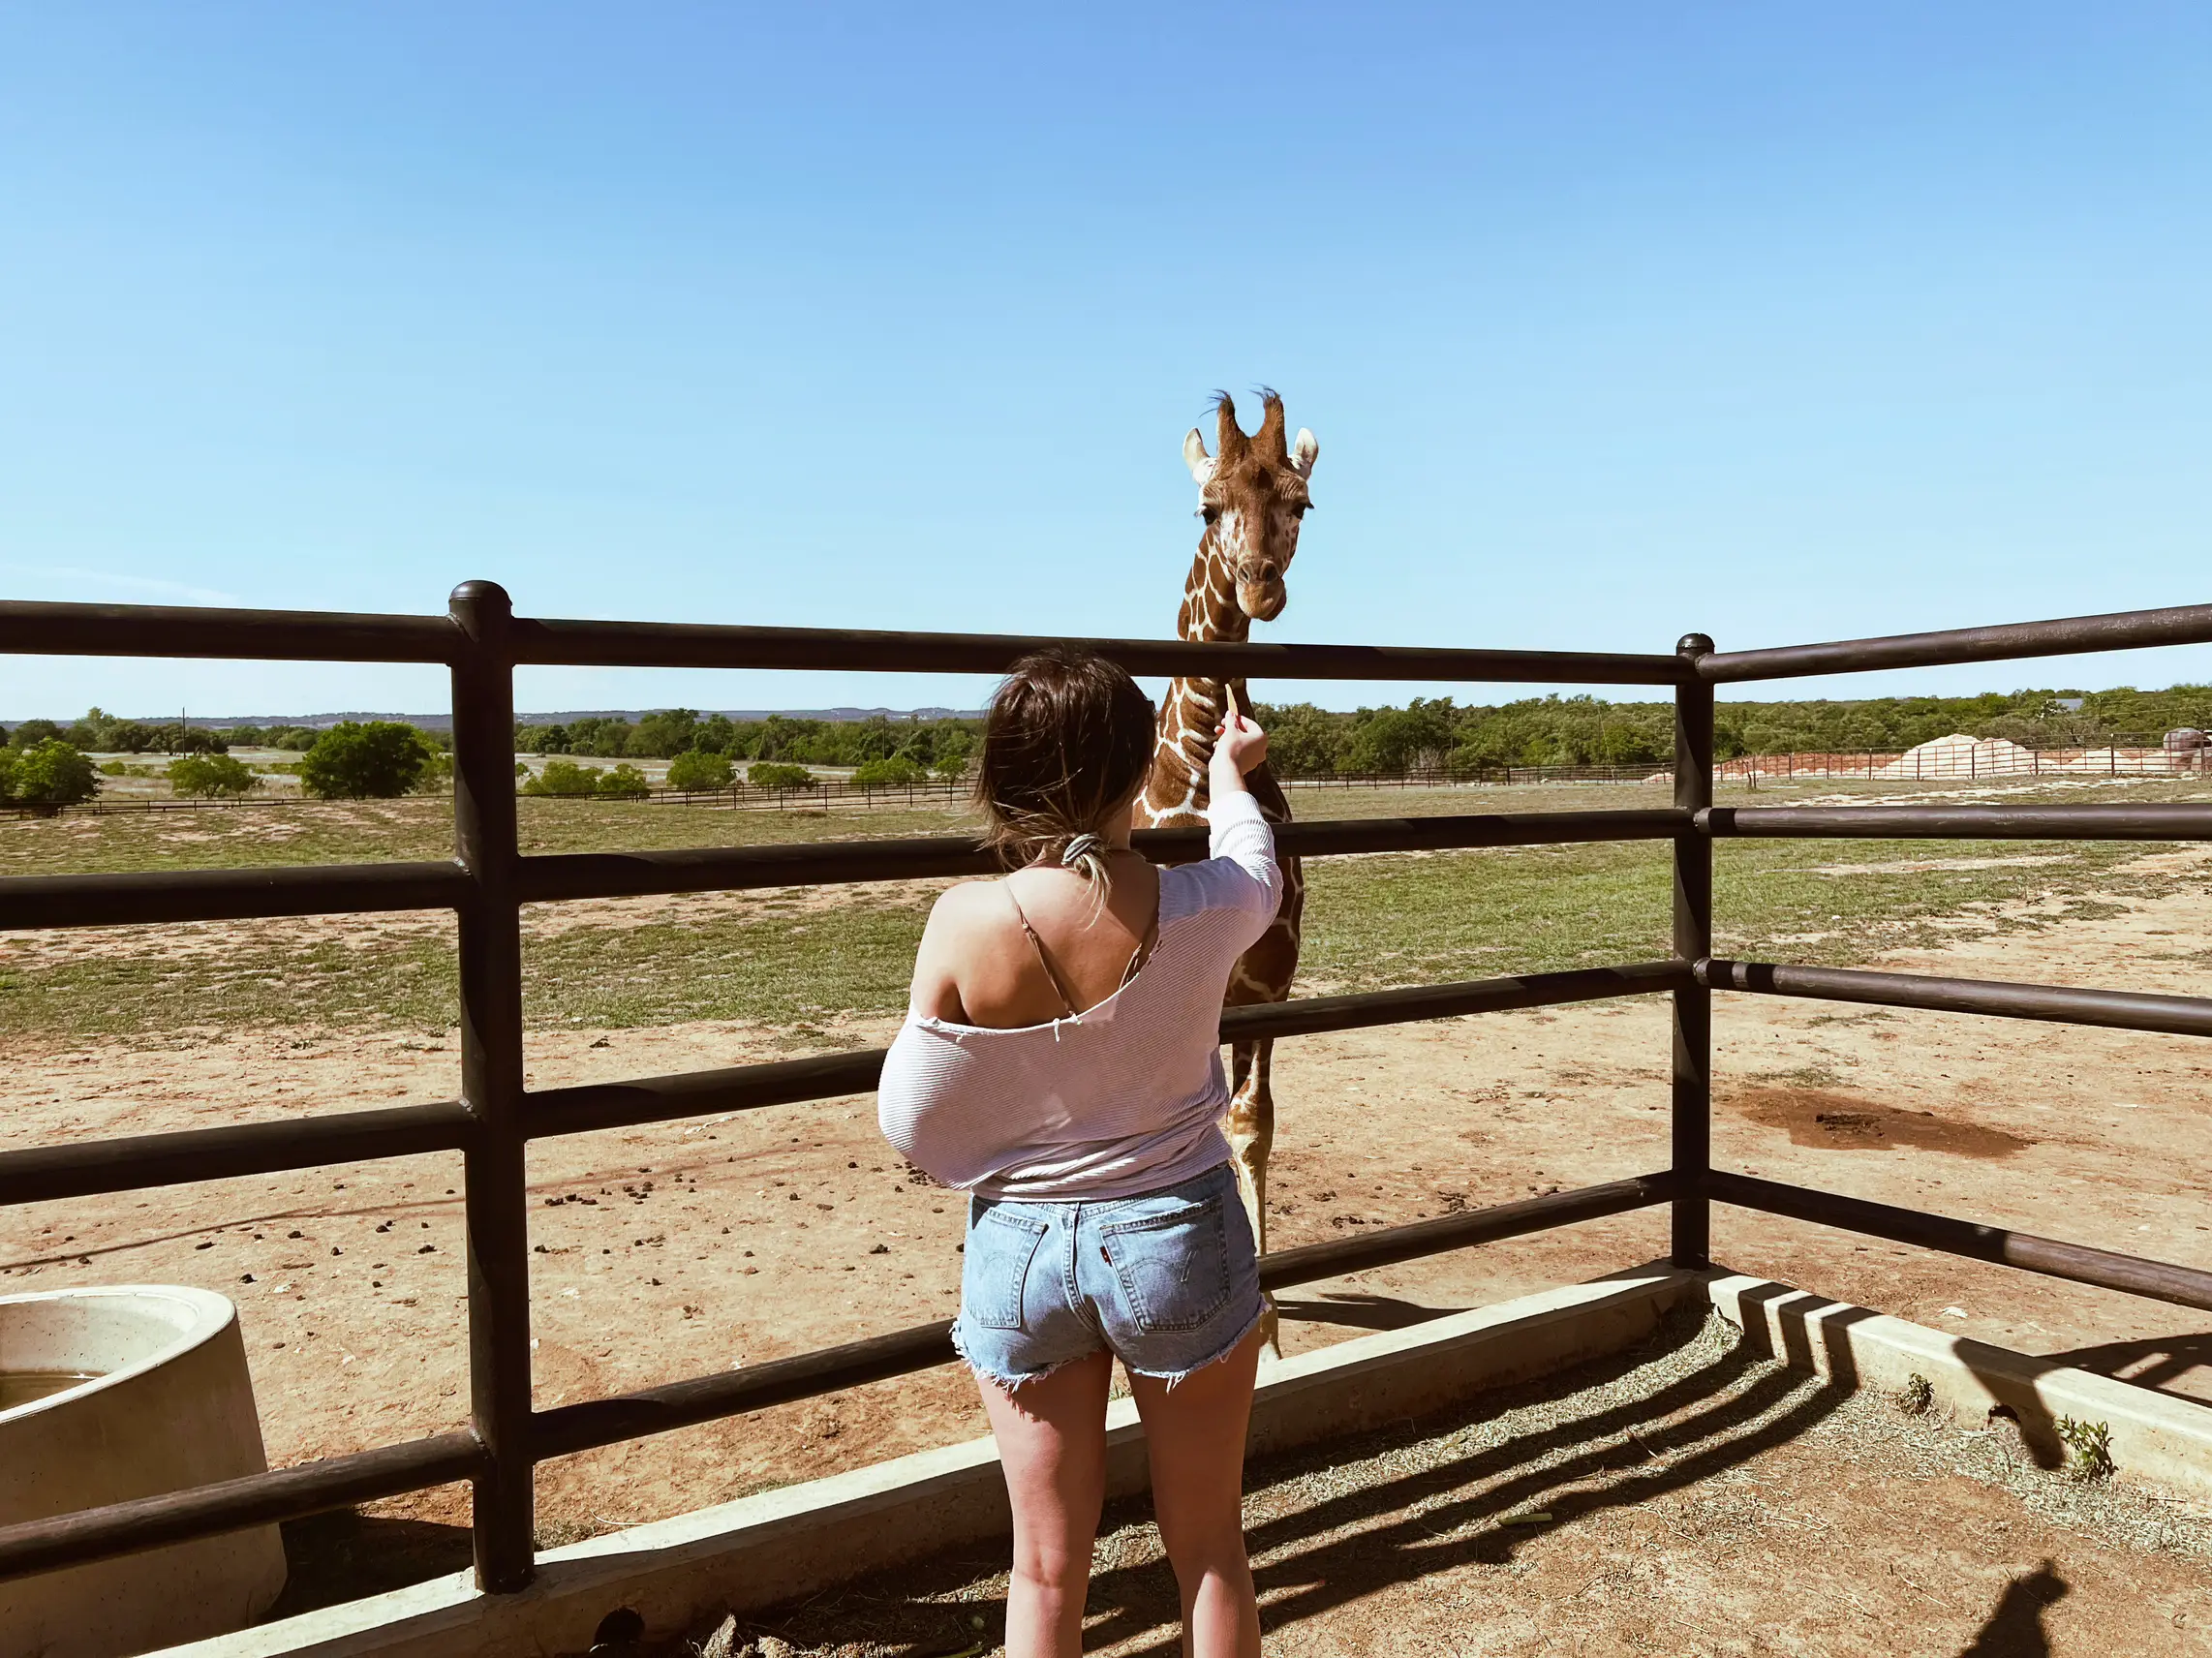  A woman is standing in front of a fence, holding a giraffe. The giraffe is standing next to the woman.